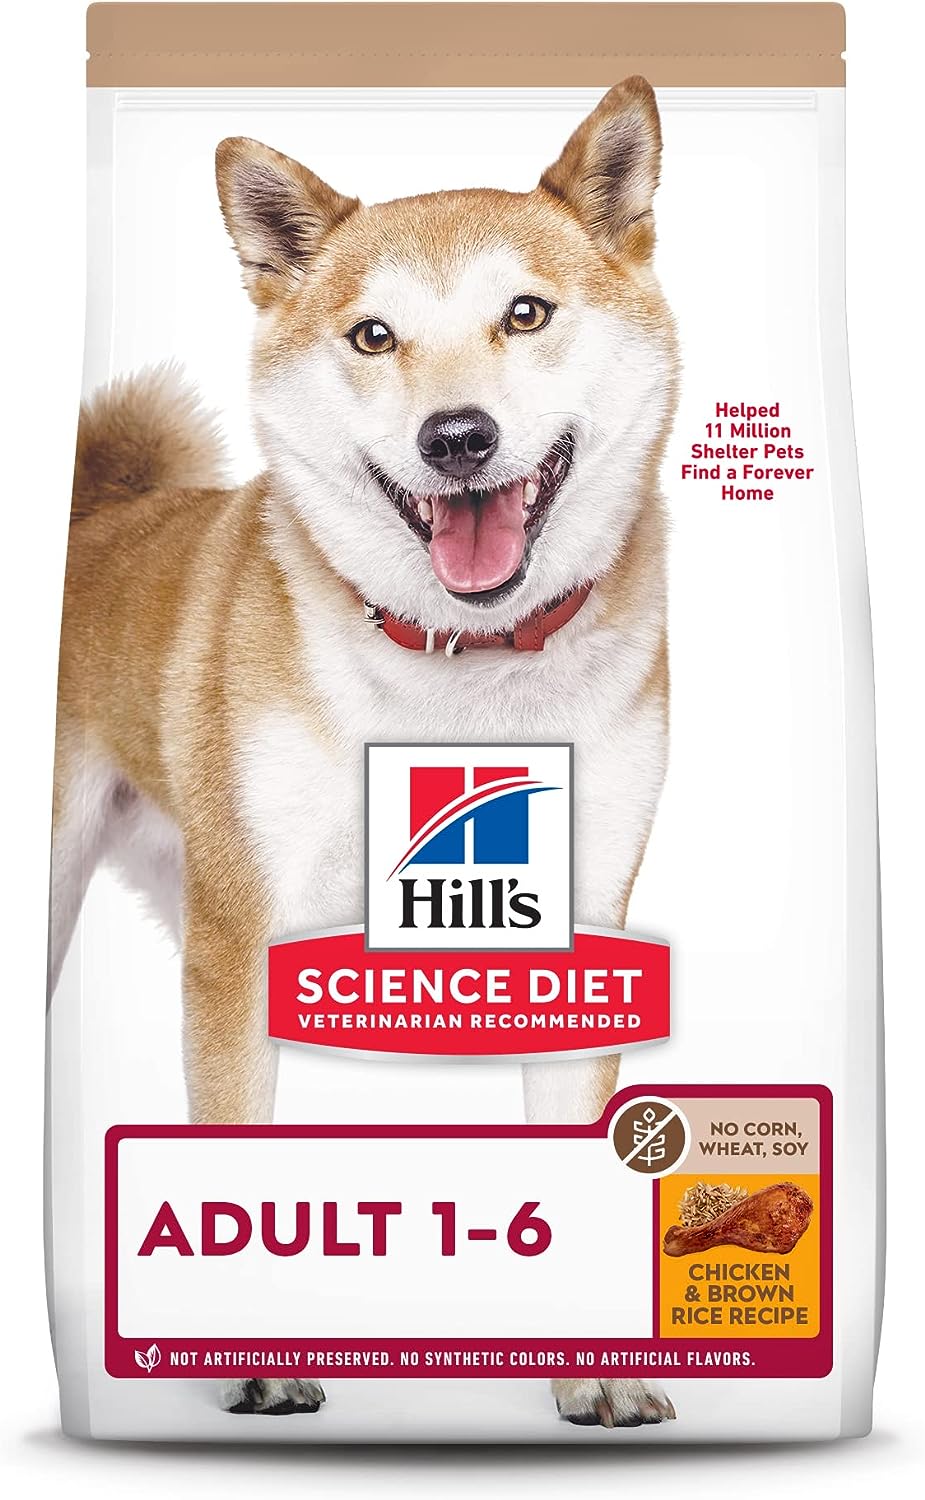 Hill’s Science Diet Adult 1-6 Chicken & Brown Rice Recipe No Corn, Wheat, Soy Dry Dog Food – Gallery Image 1